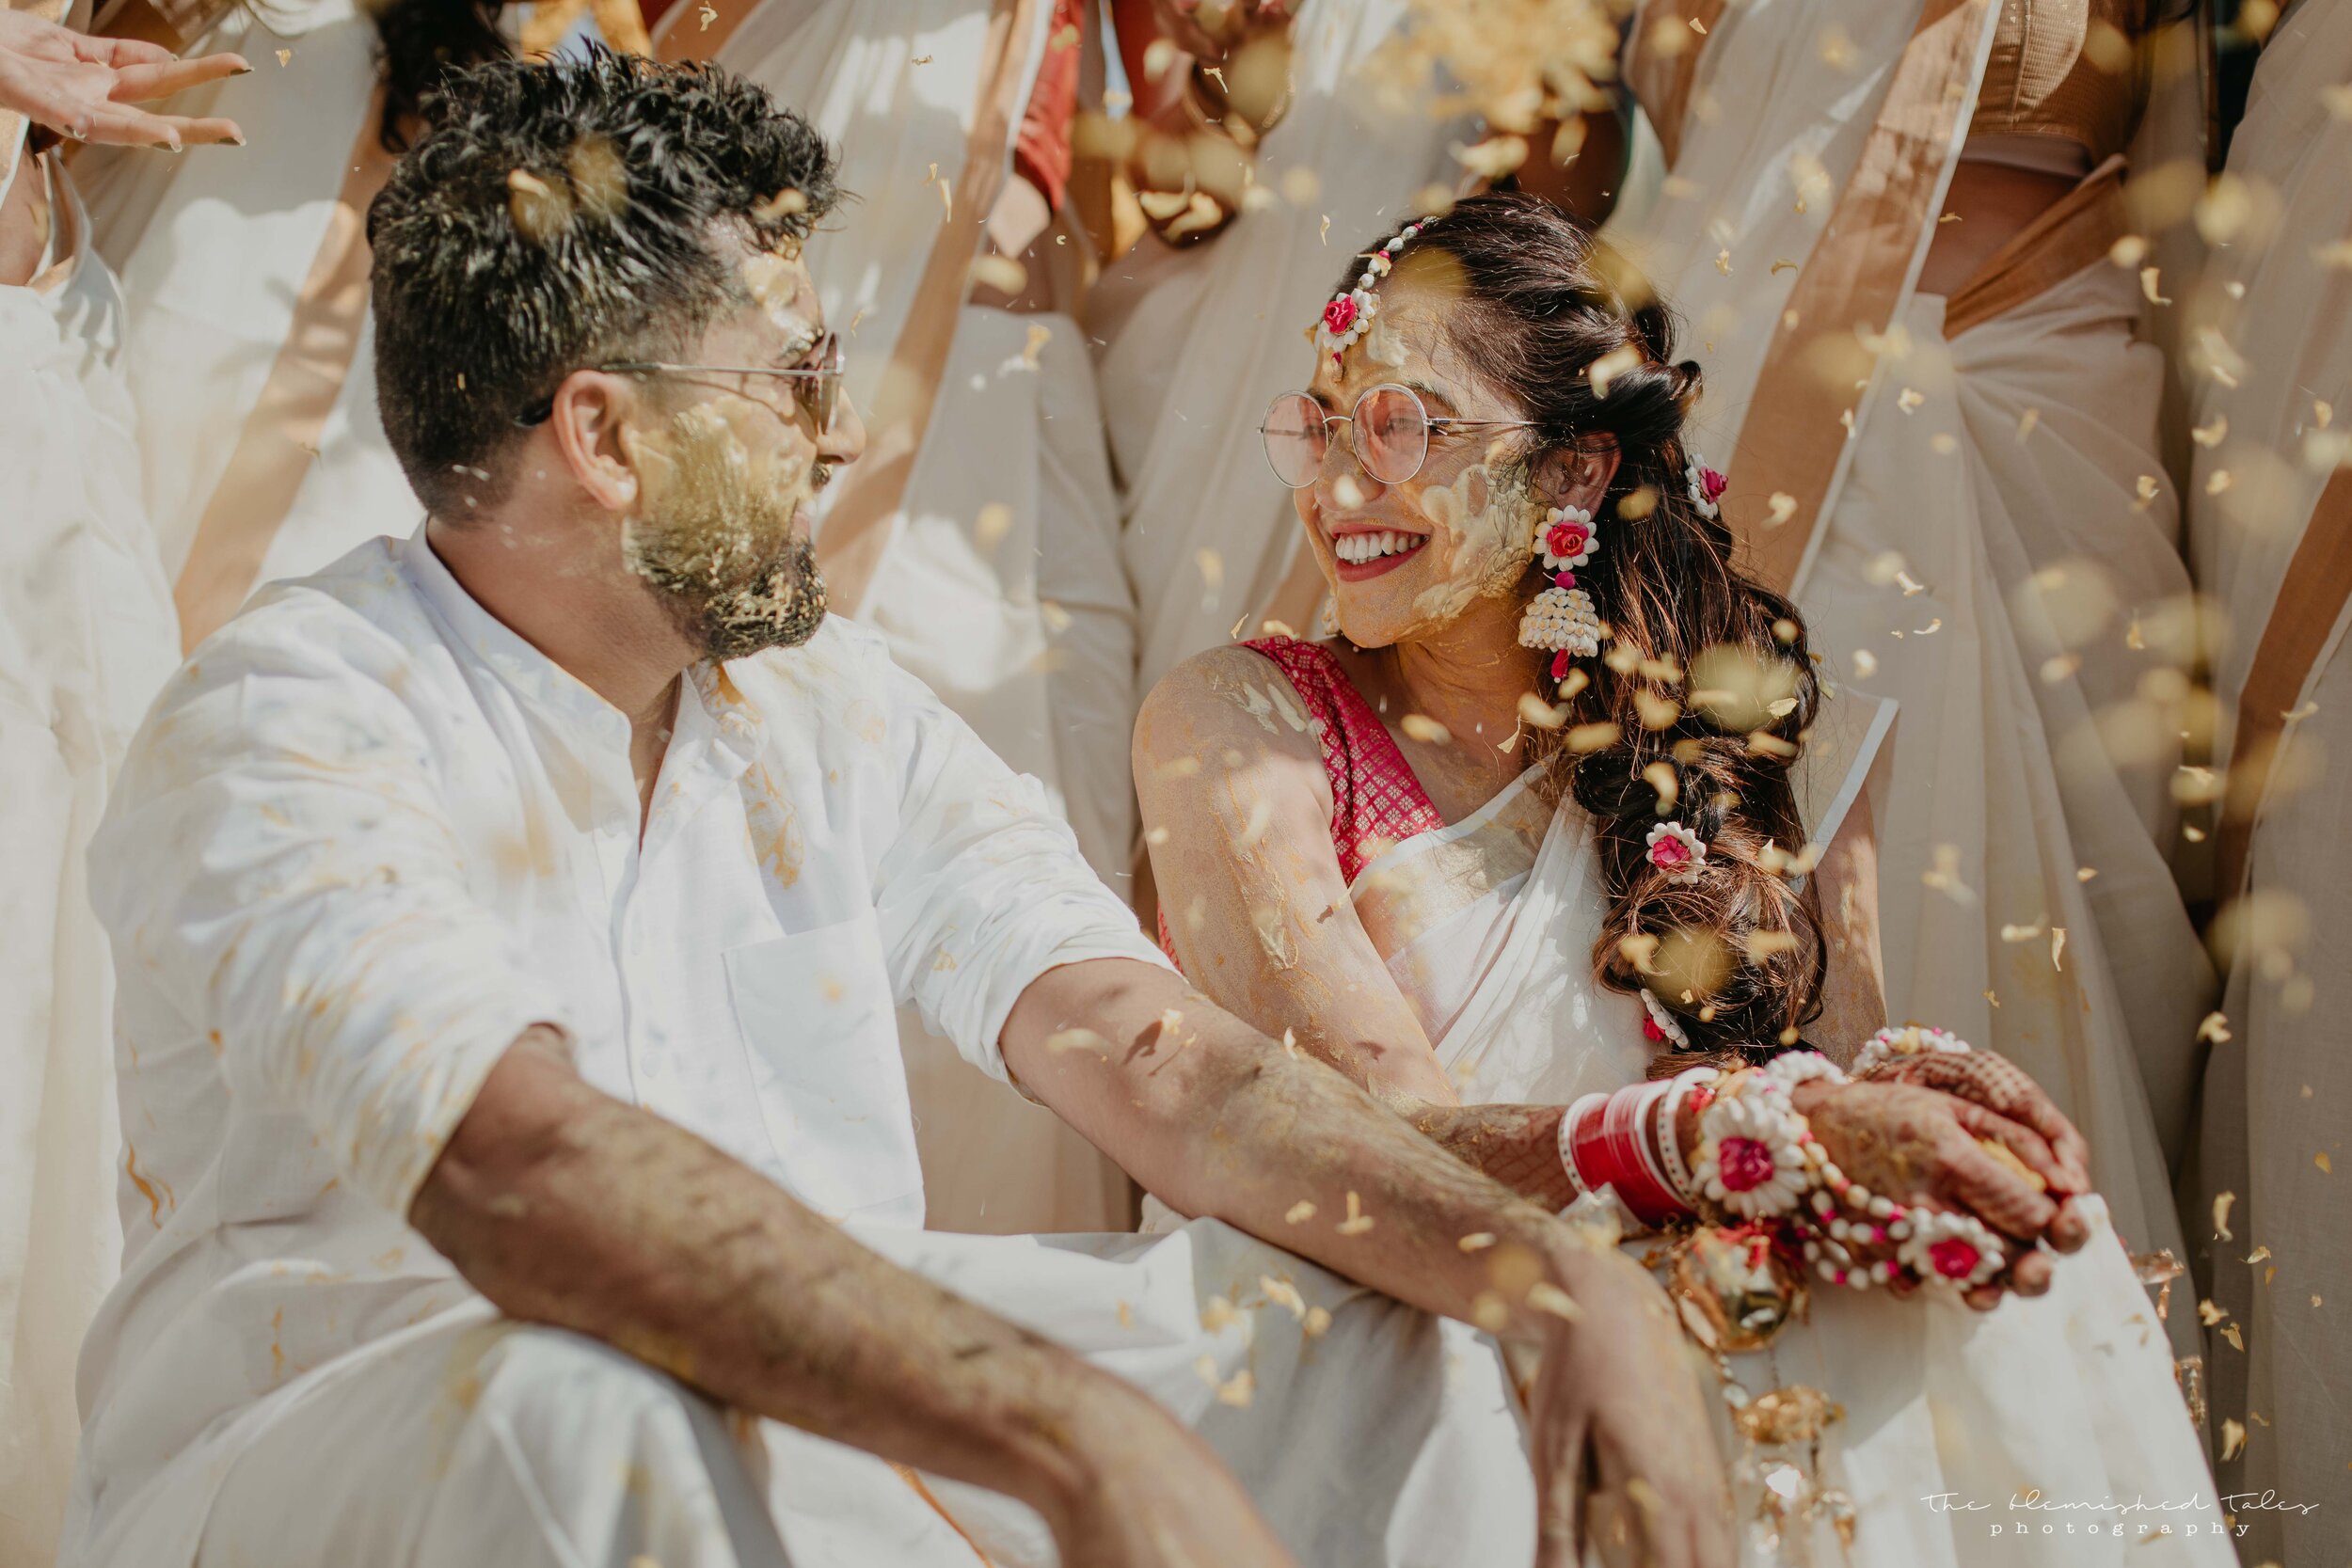 Saloni and Krishnan share a moment as they are showered with flowers just after their haldi